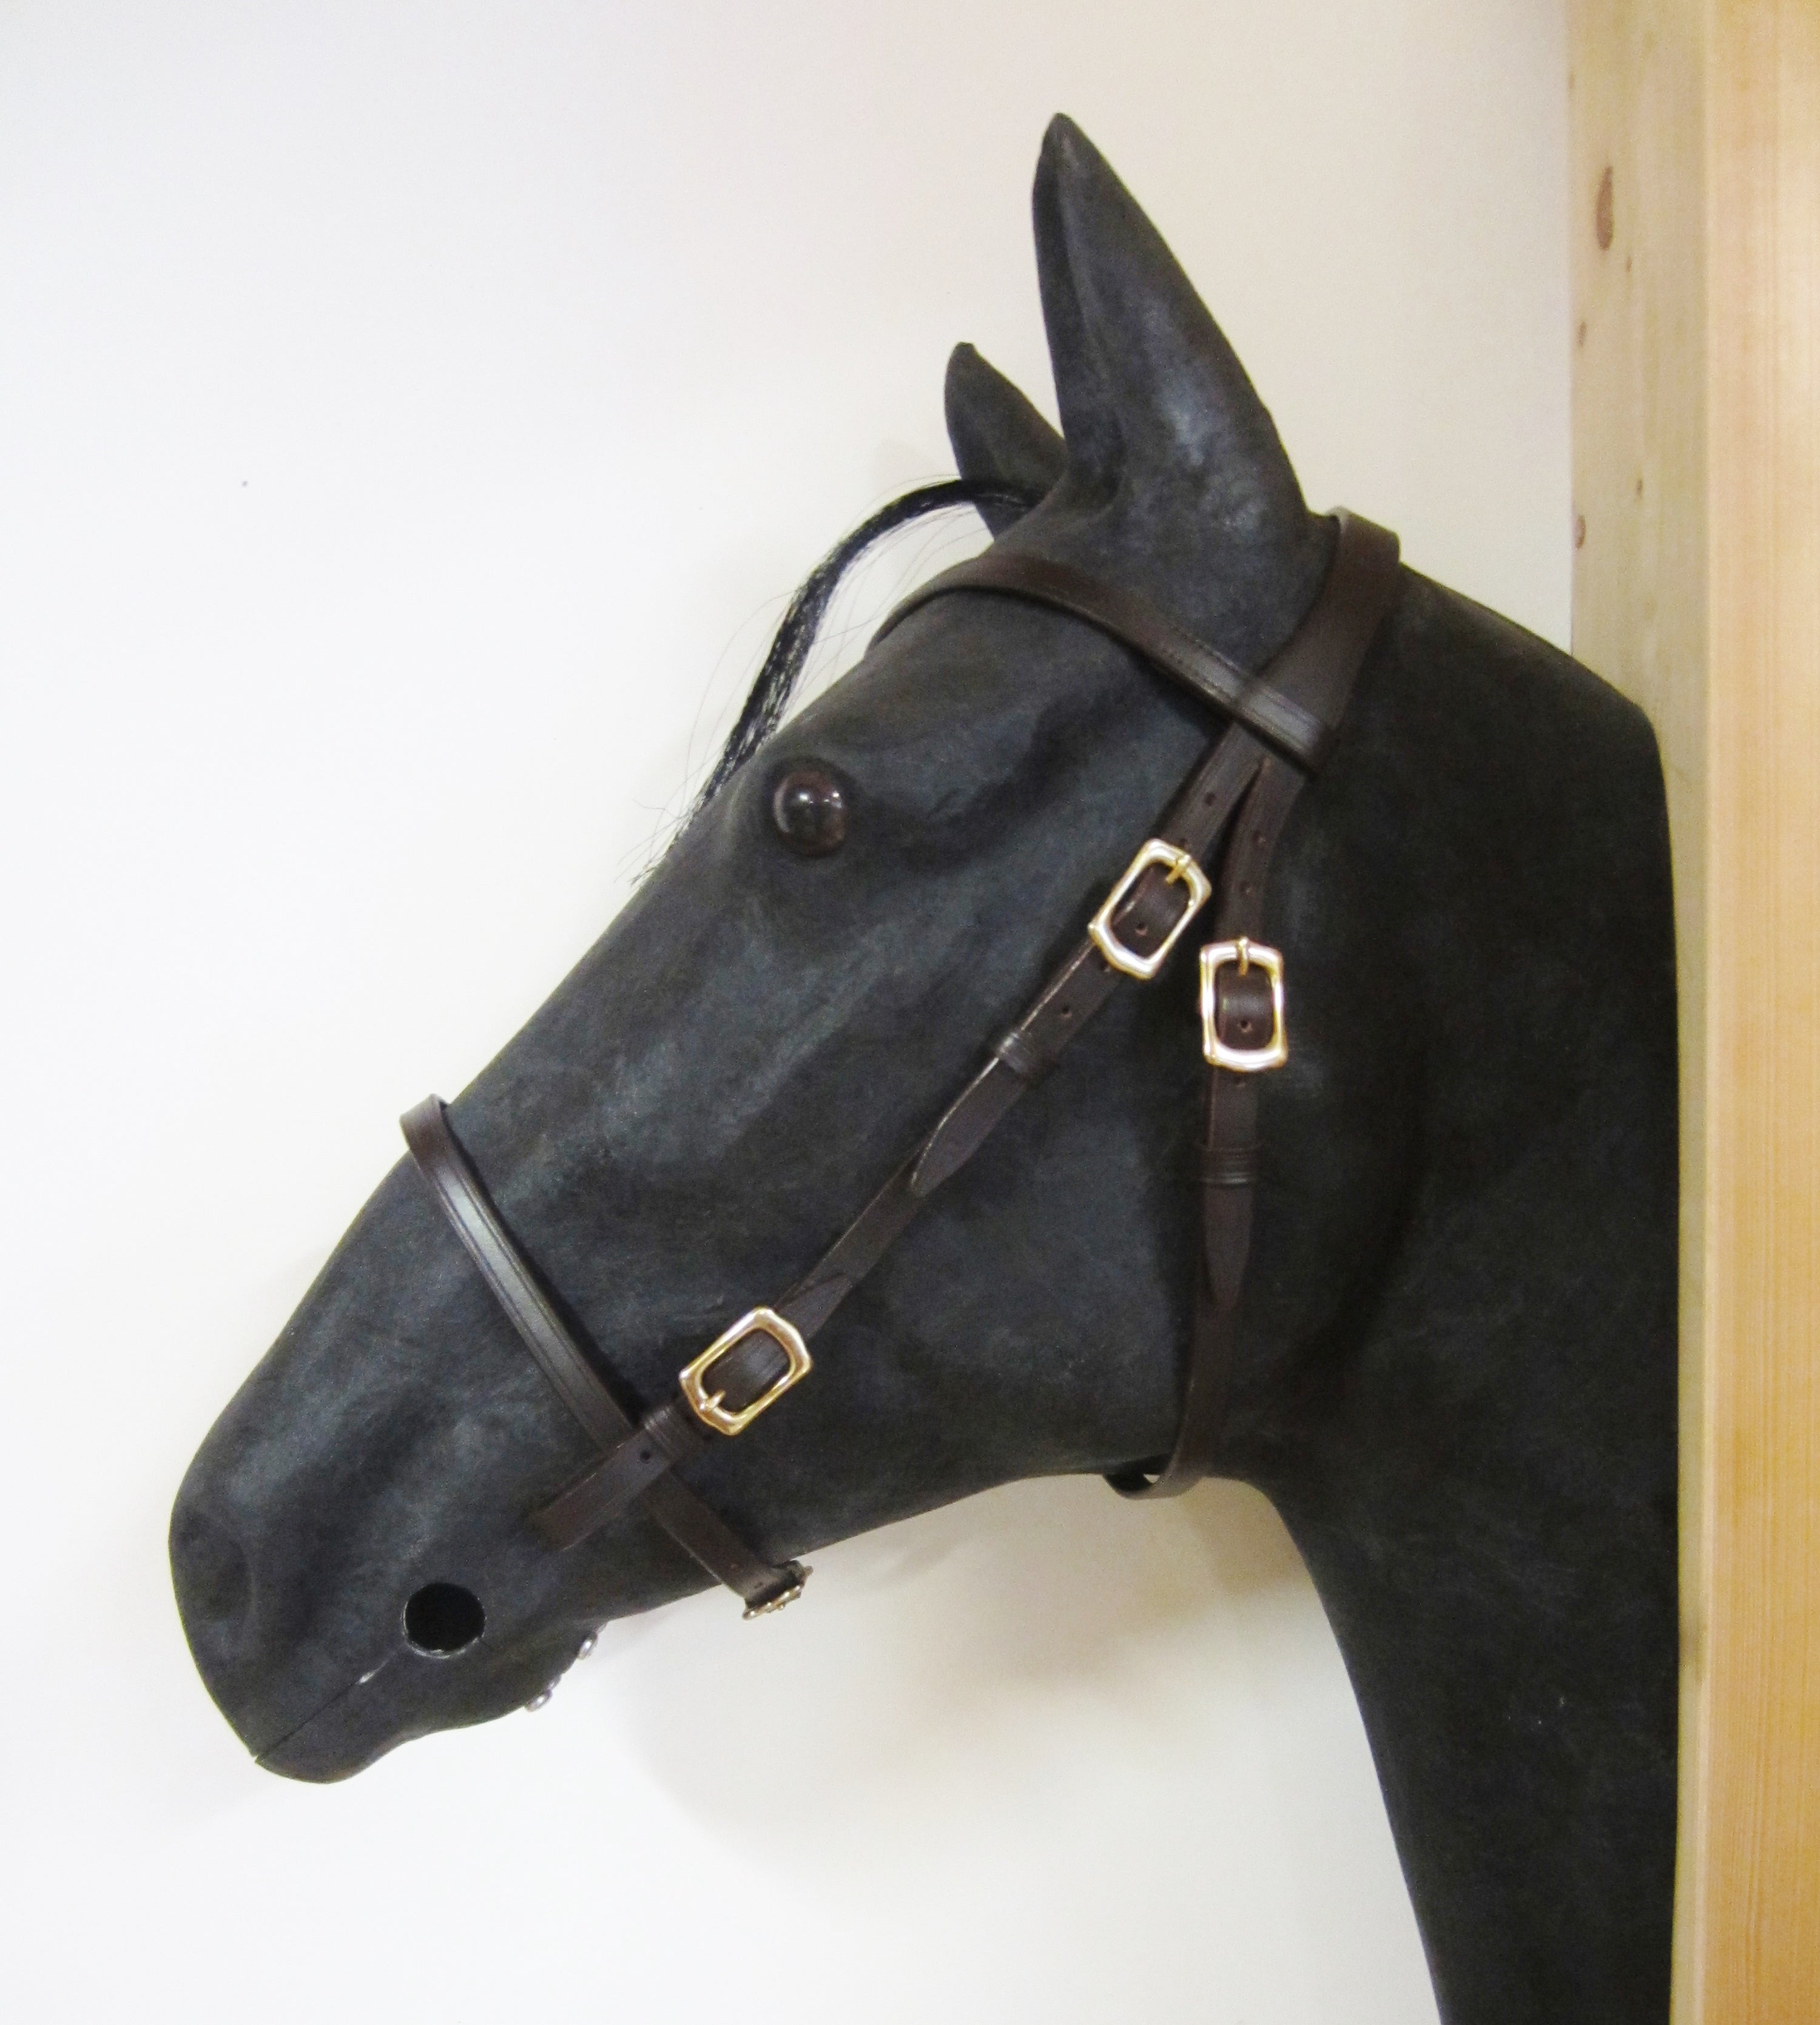 Baroque bridle "Aventar" with freedom of ears - unique pieces - B-STOCK!